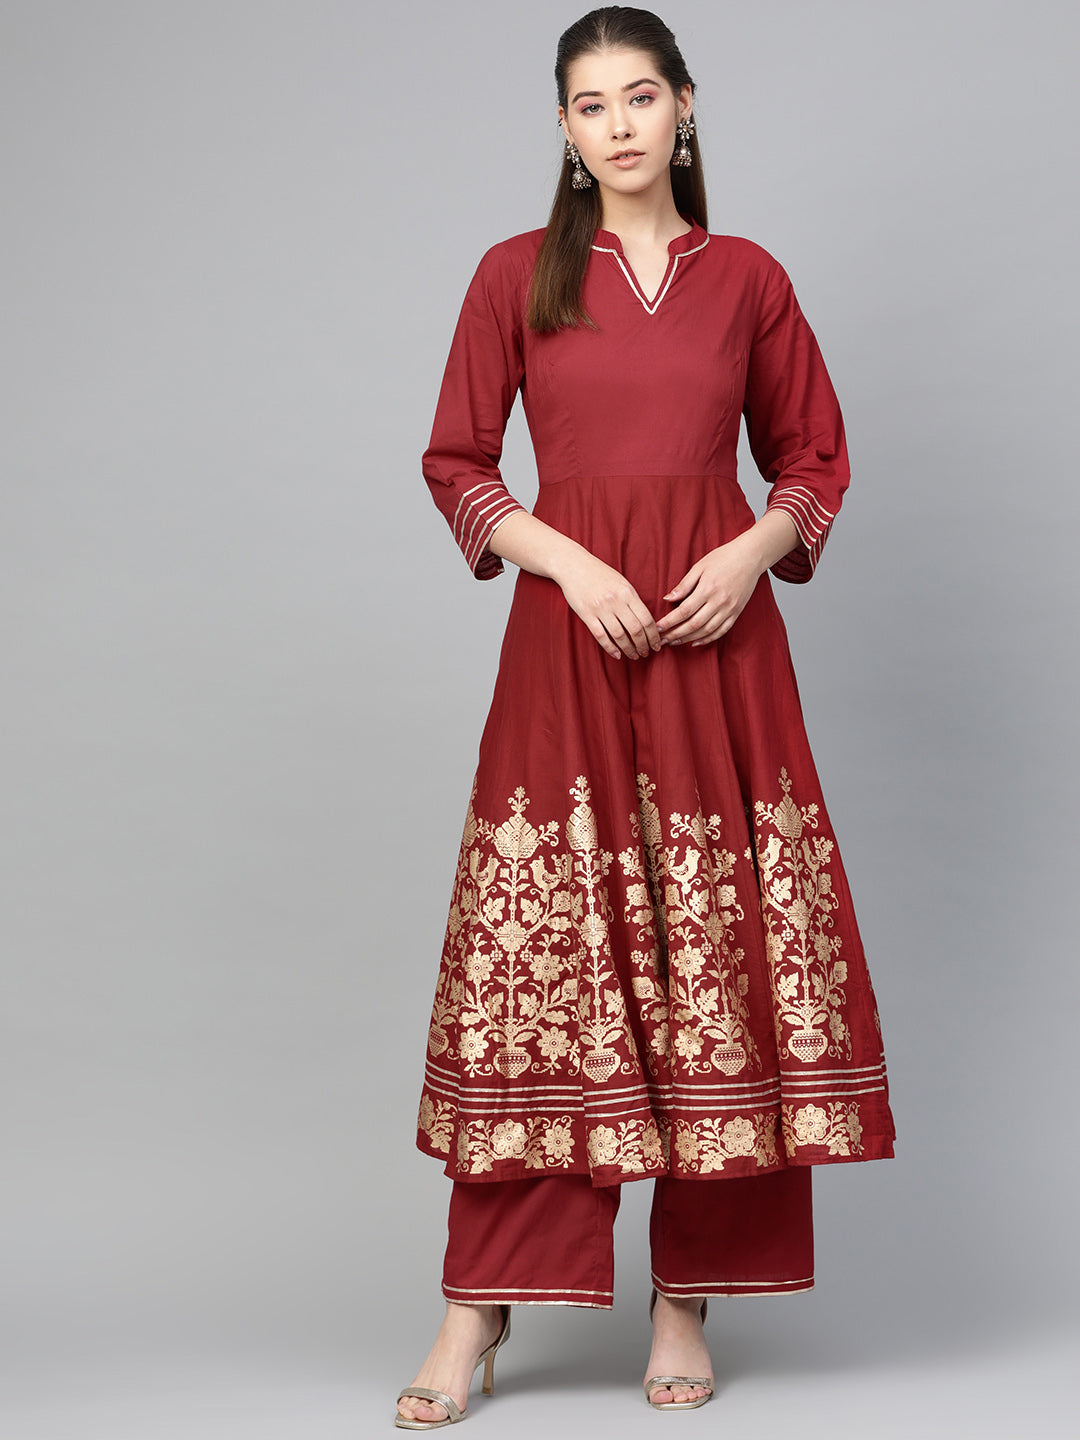 Women's Maroon And Golden Printed Kurta With Palazzos - Bhama Couture